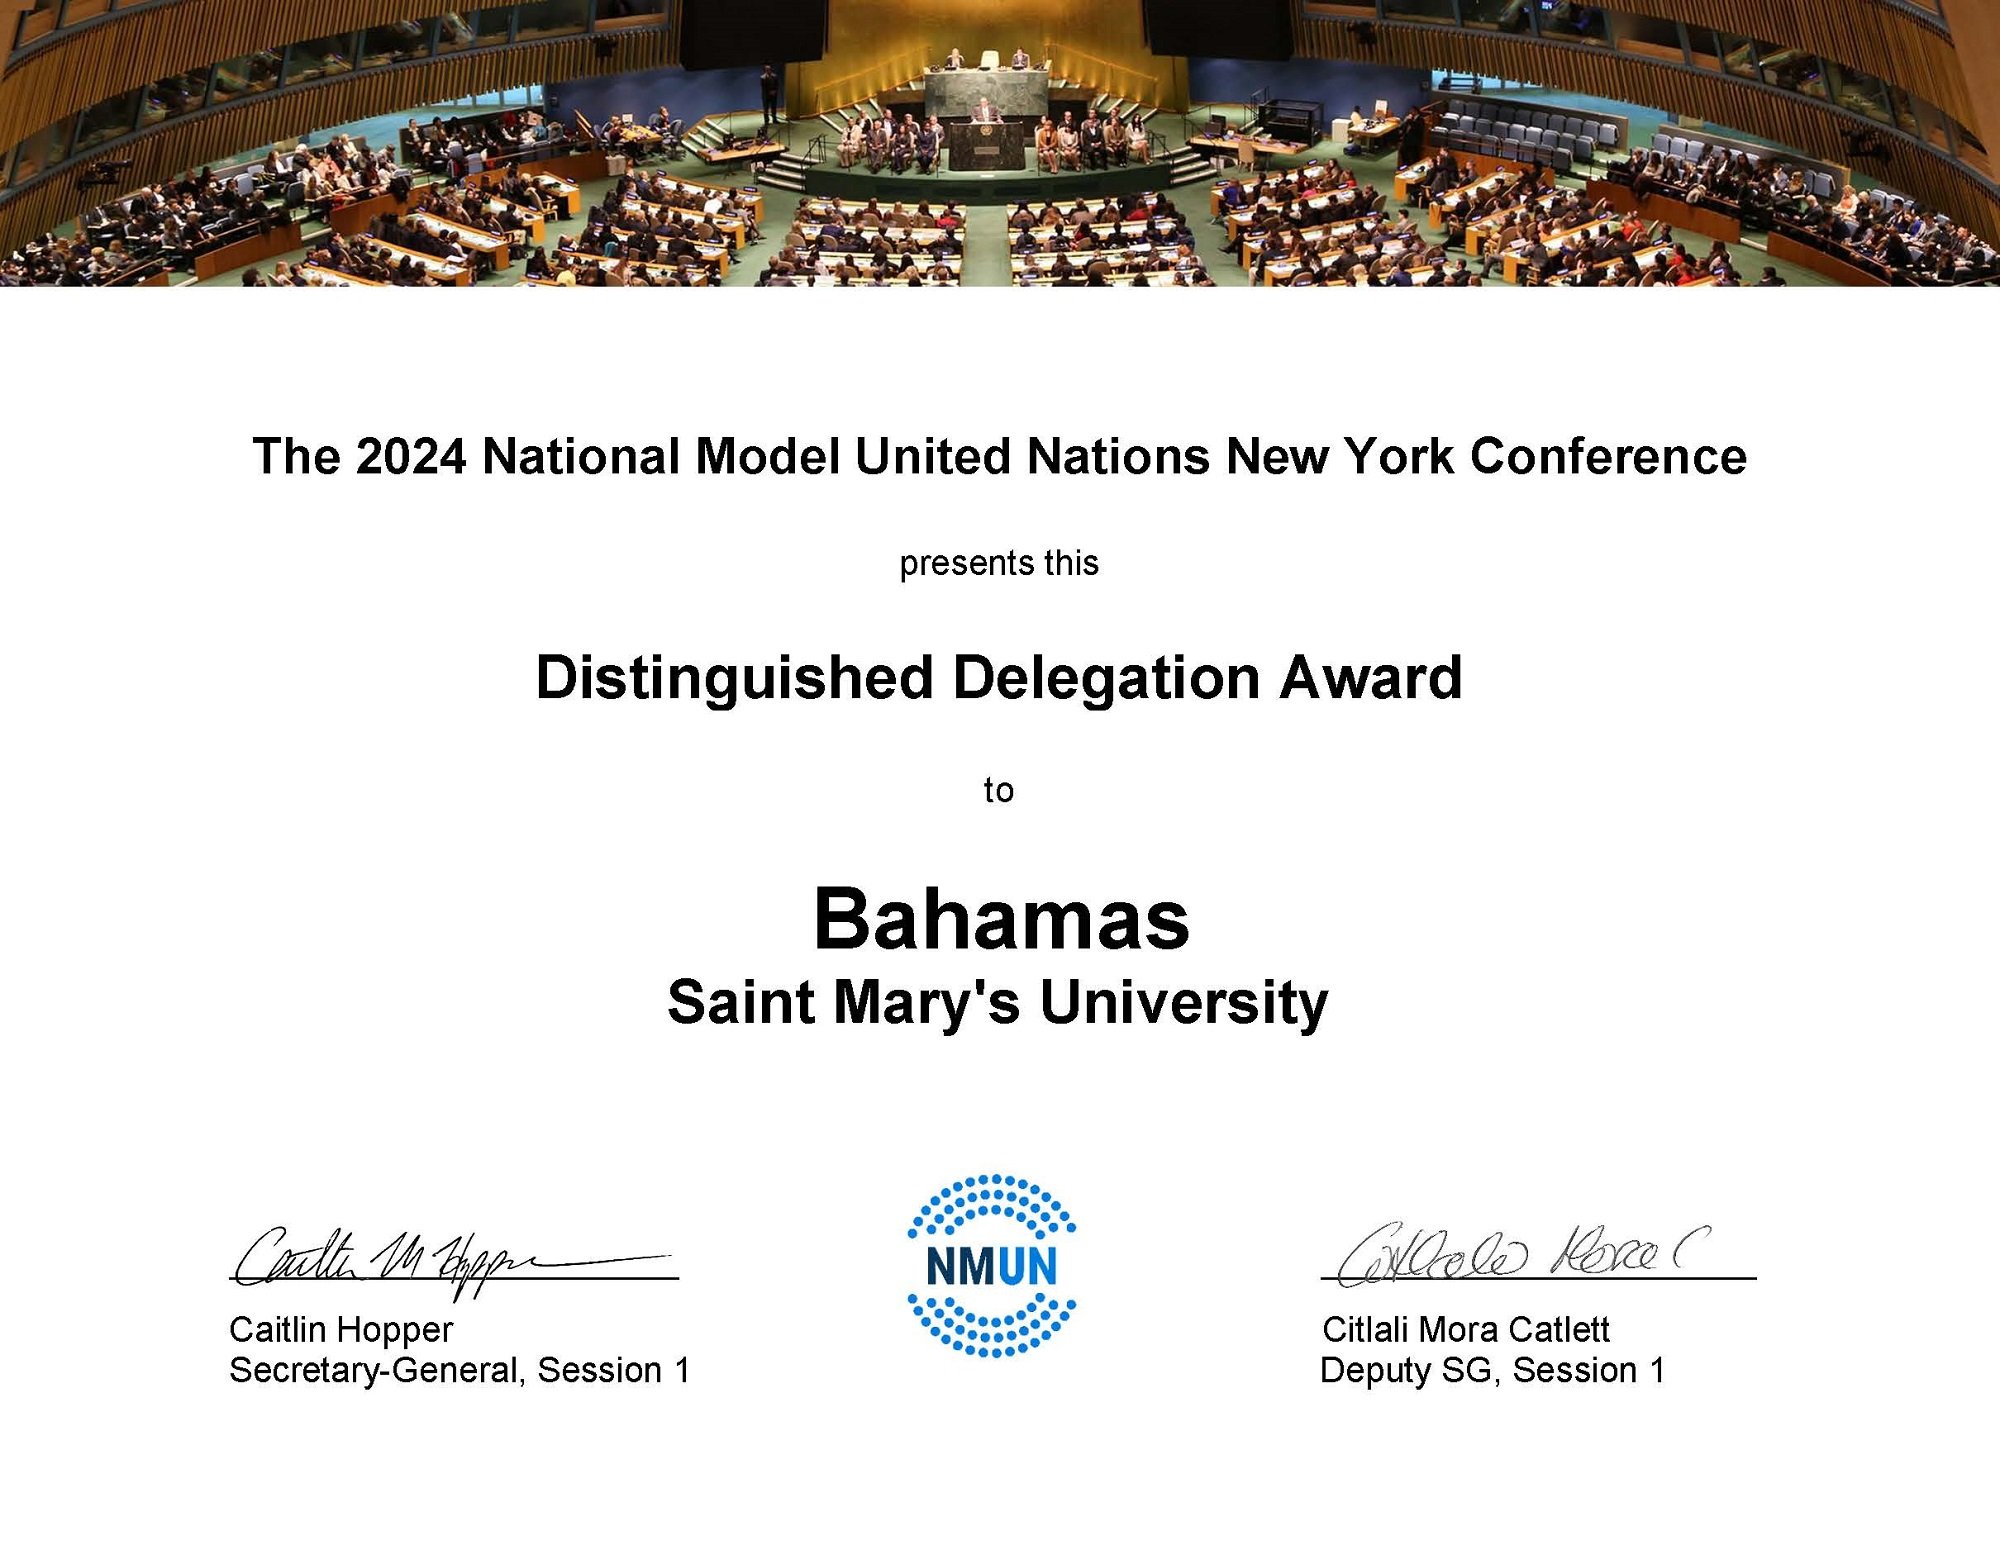  Saint Mary’s team received the Distinguished Delegation Award 